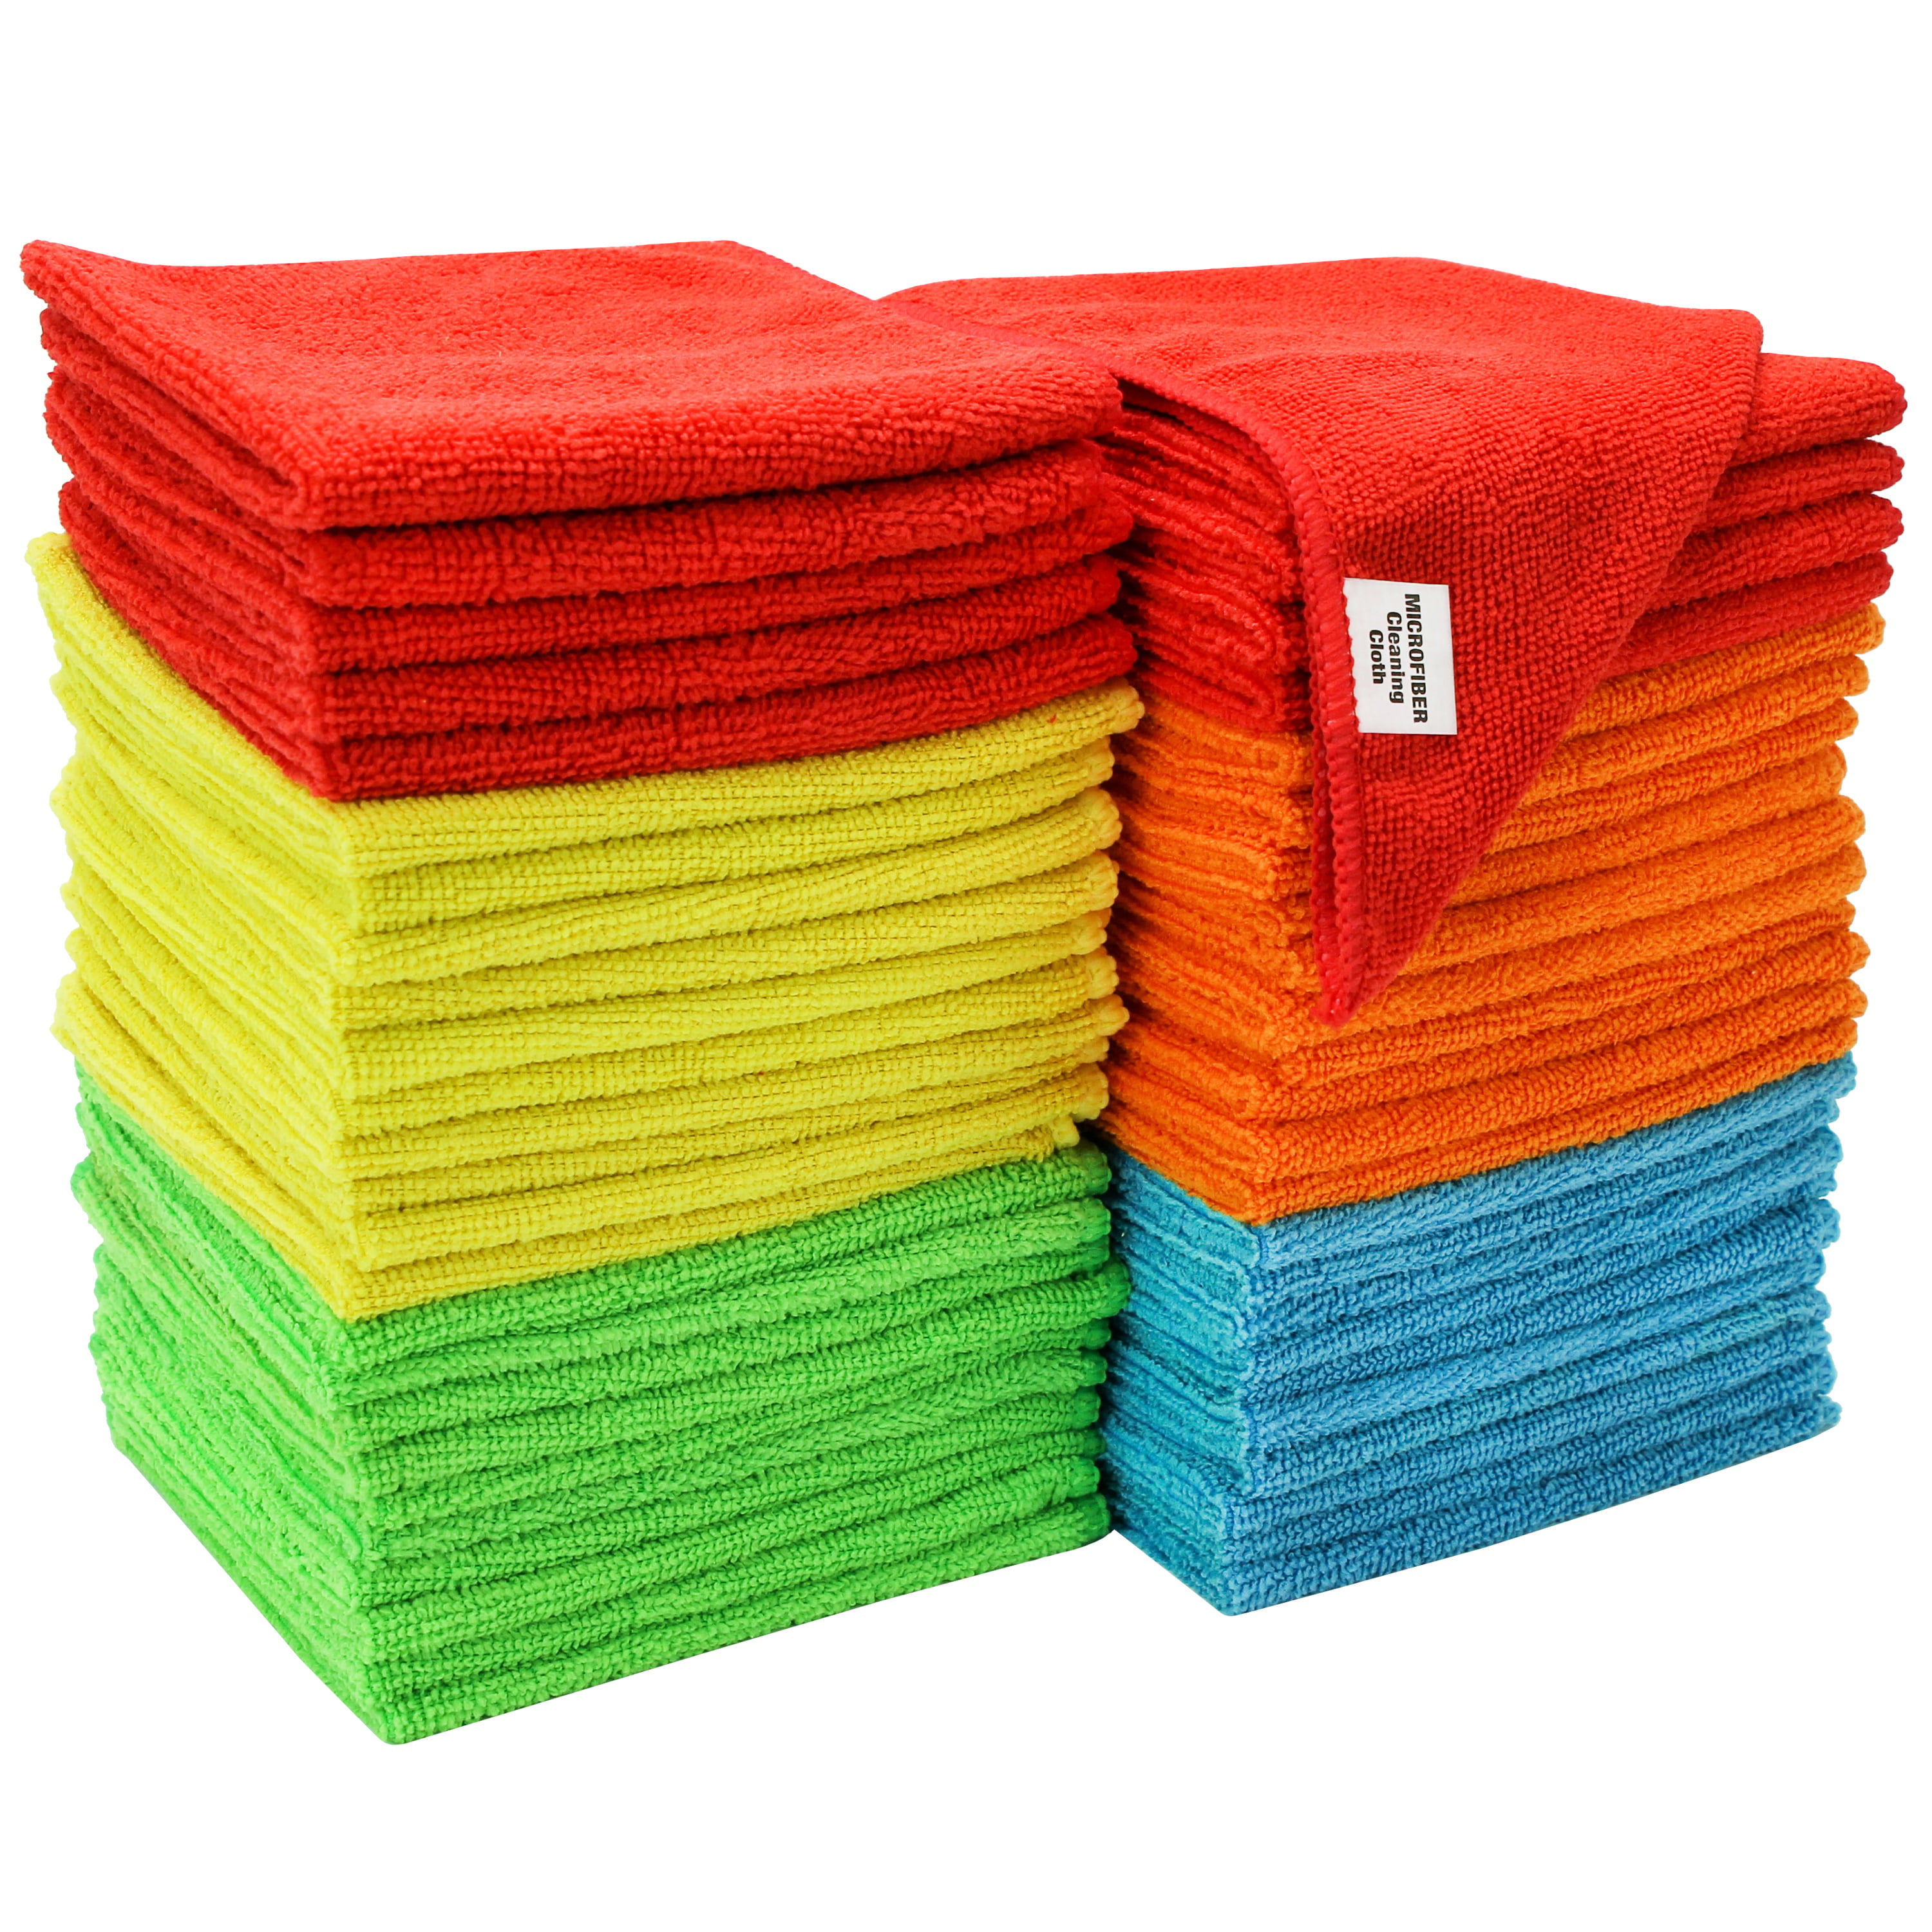 25 Pack S & T 594501 25 Pack Microfiber Bulk Cleaning Cloth 